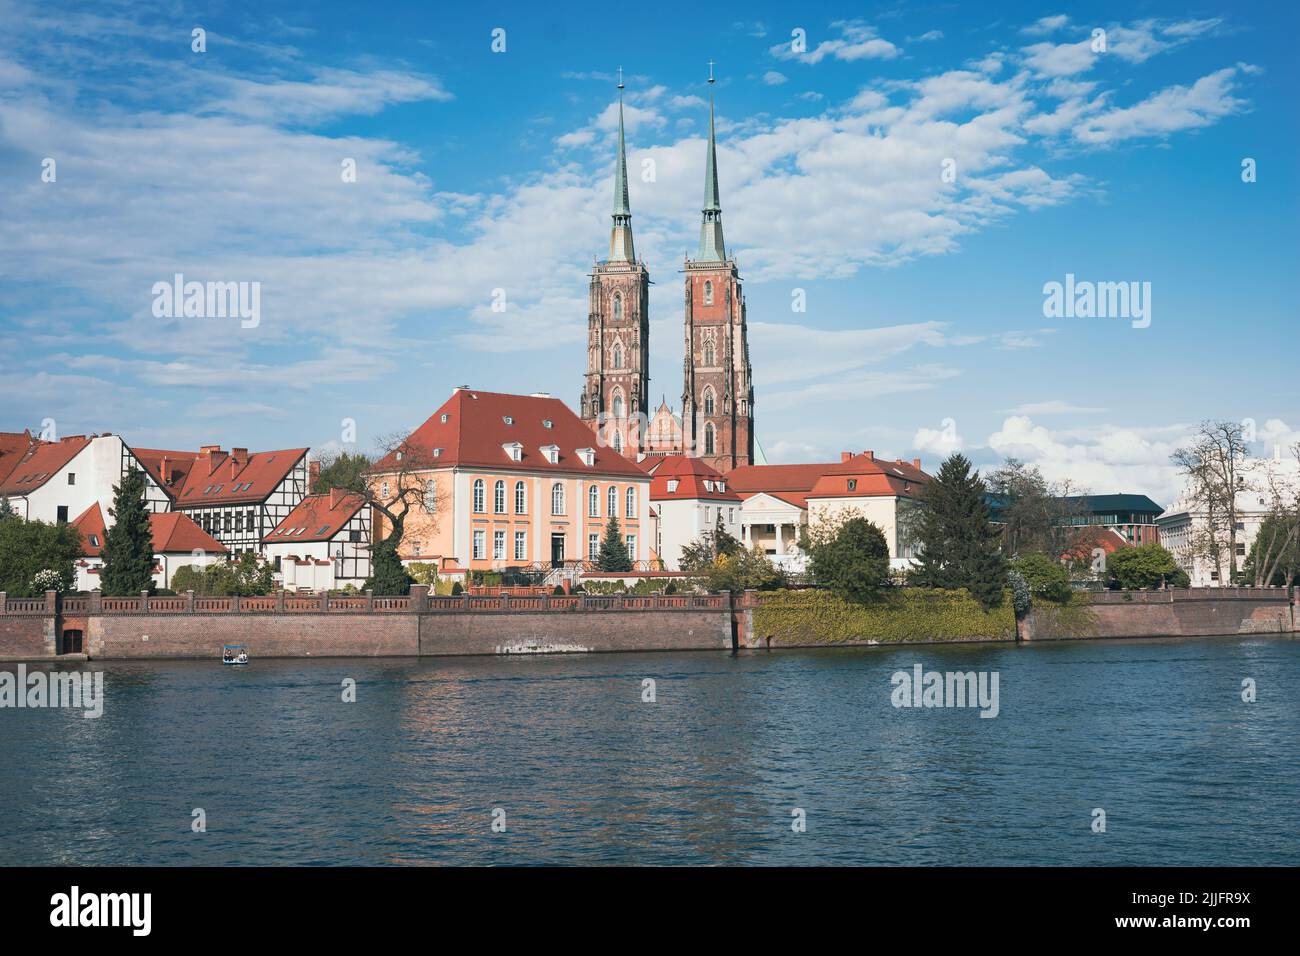 WROCŁAW, POLAND - MAY 8, 2022: Cathedral Island with the Cathedral of St. John the Baptist seen from Xawery Dunikowski Boulevard Stock Photo